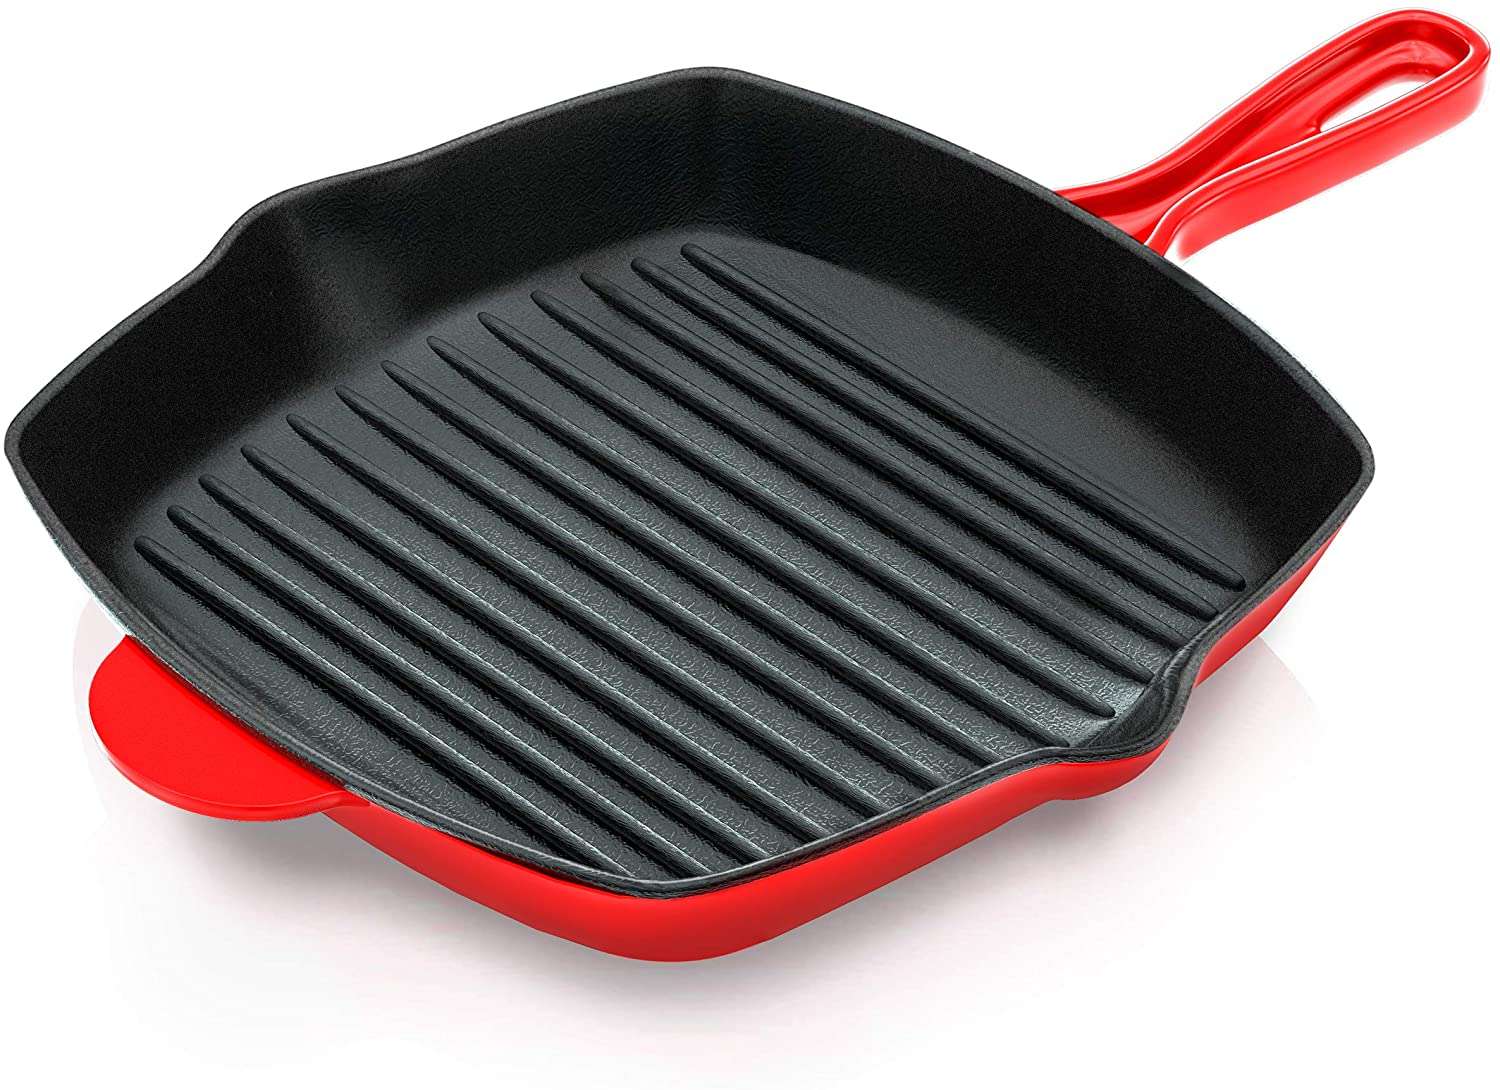 NutriChef Nonstick Cast Iron Grill Pan, 11